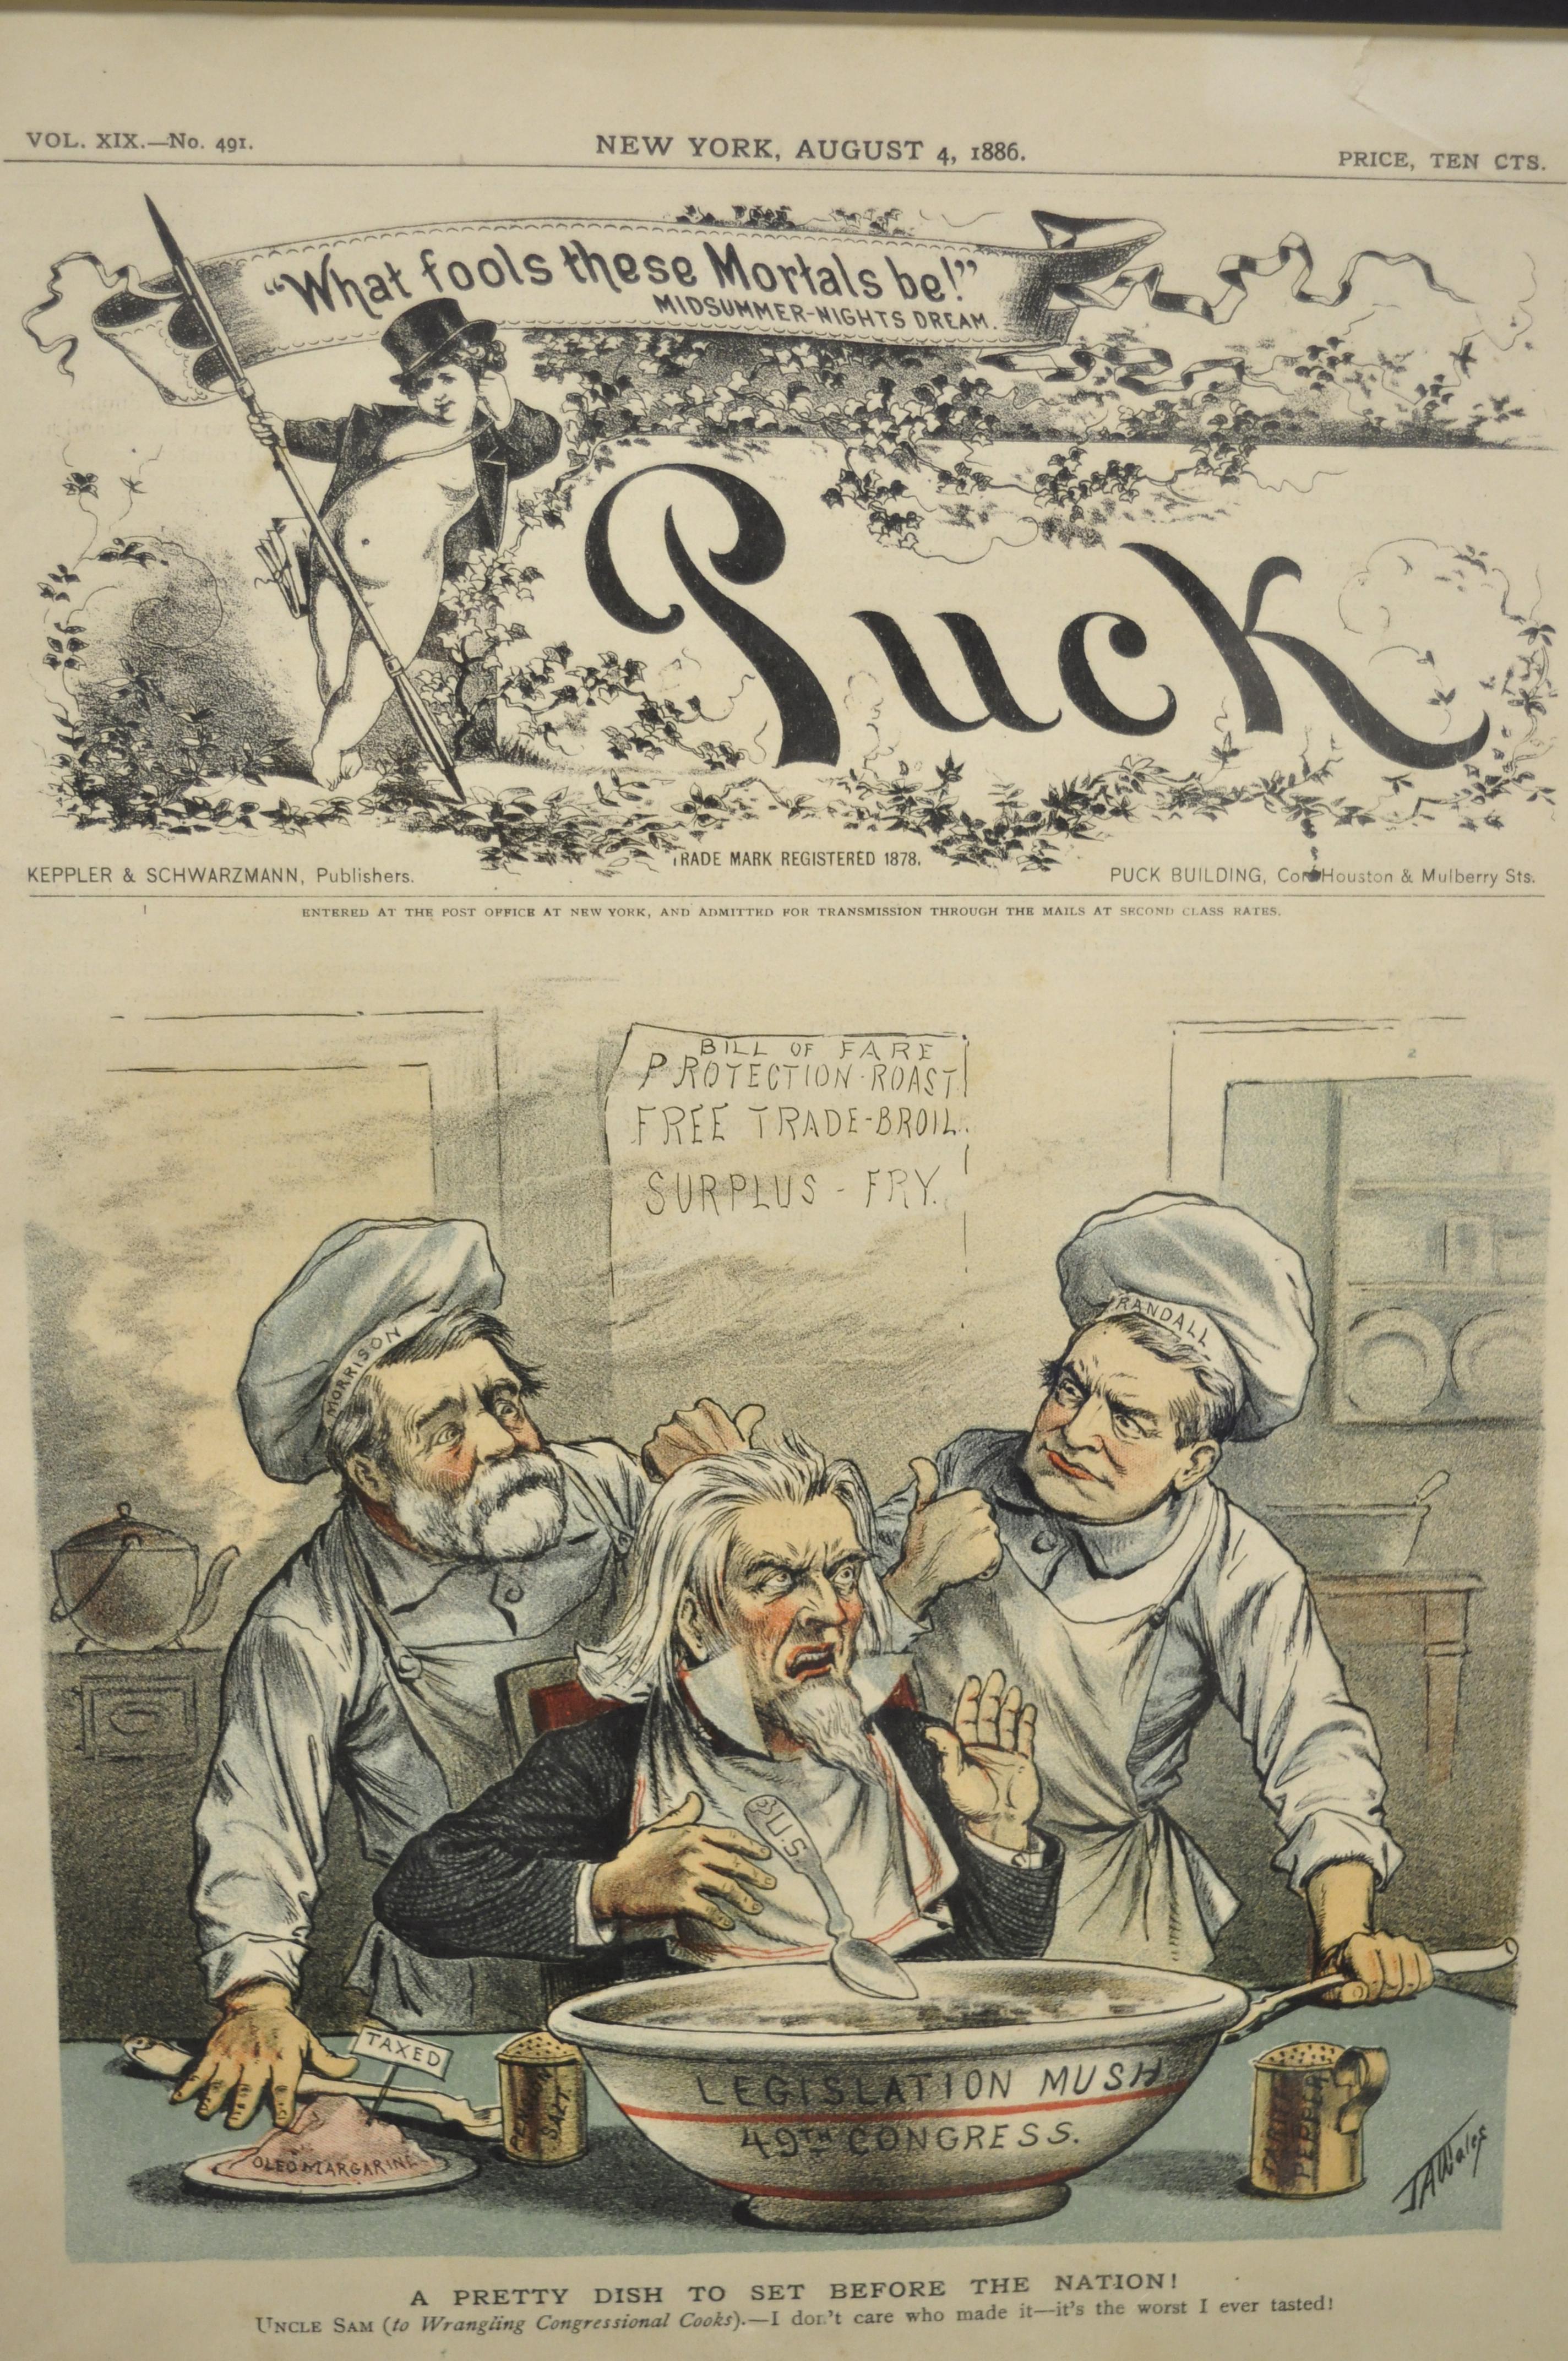 Puck magazine political illustration cartoon lithograph framed art - Set of 7. Item features burl wood custom frames, original lithographs from 1886, very nice antique set, circa late 19th century. Measurements: Frame: 21.5